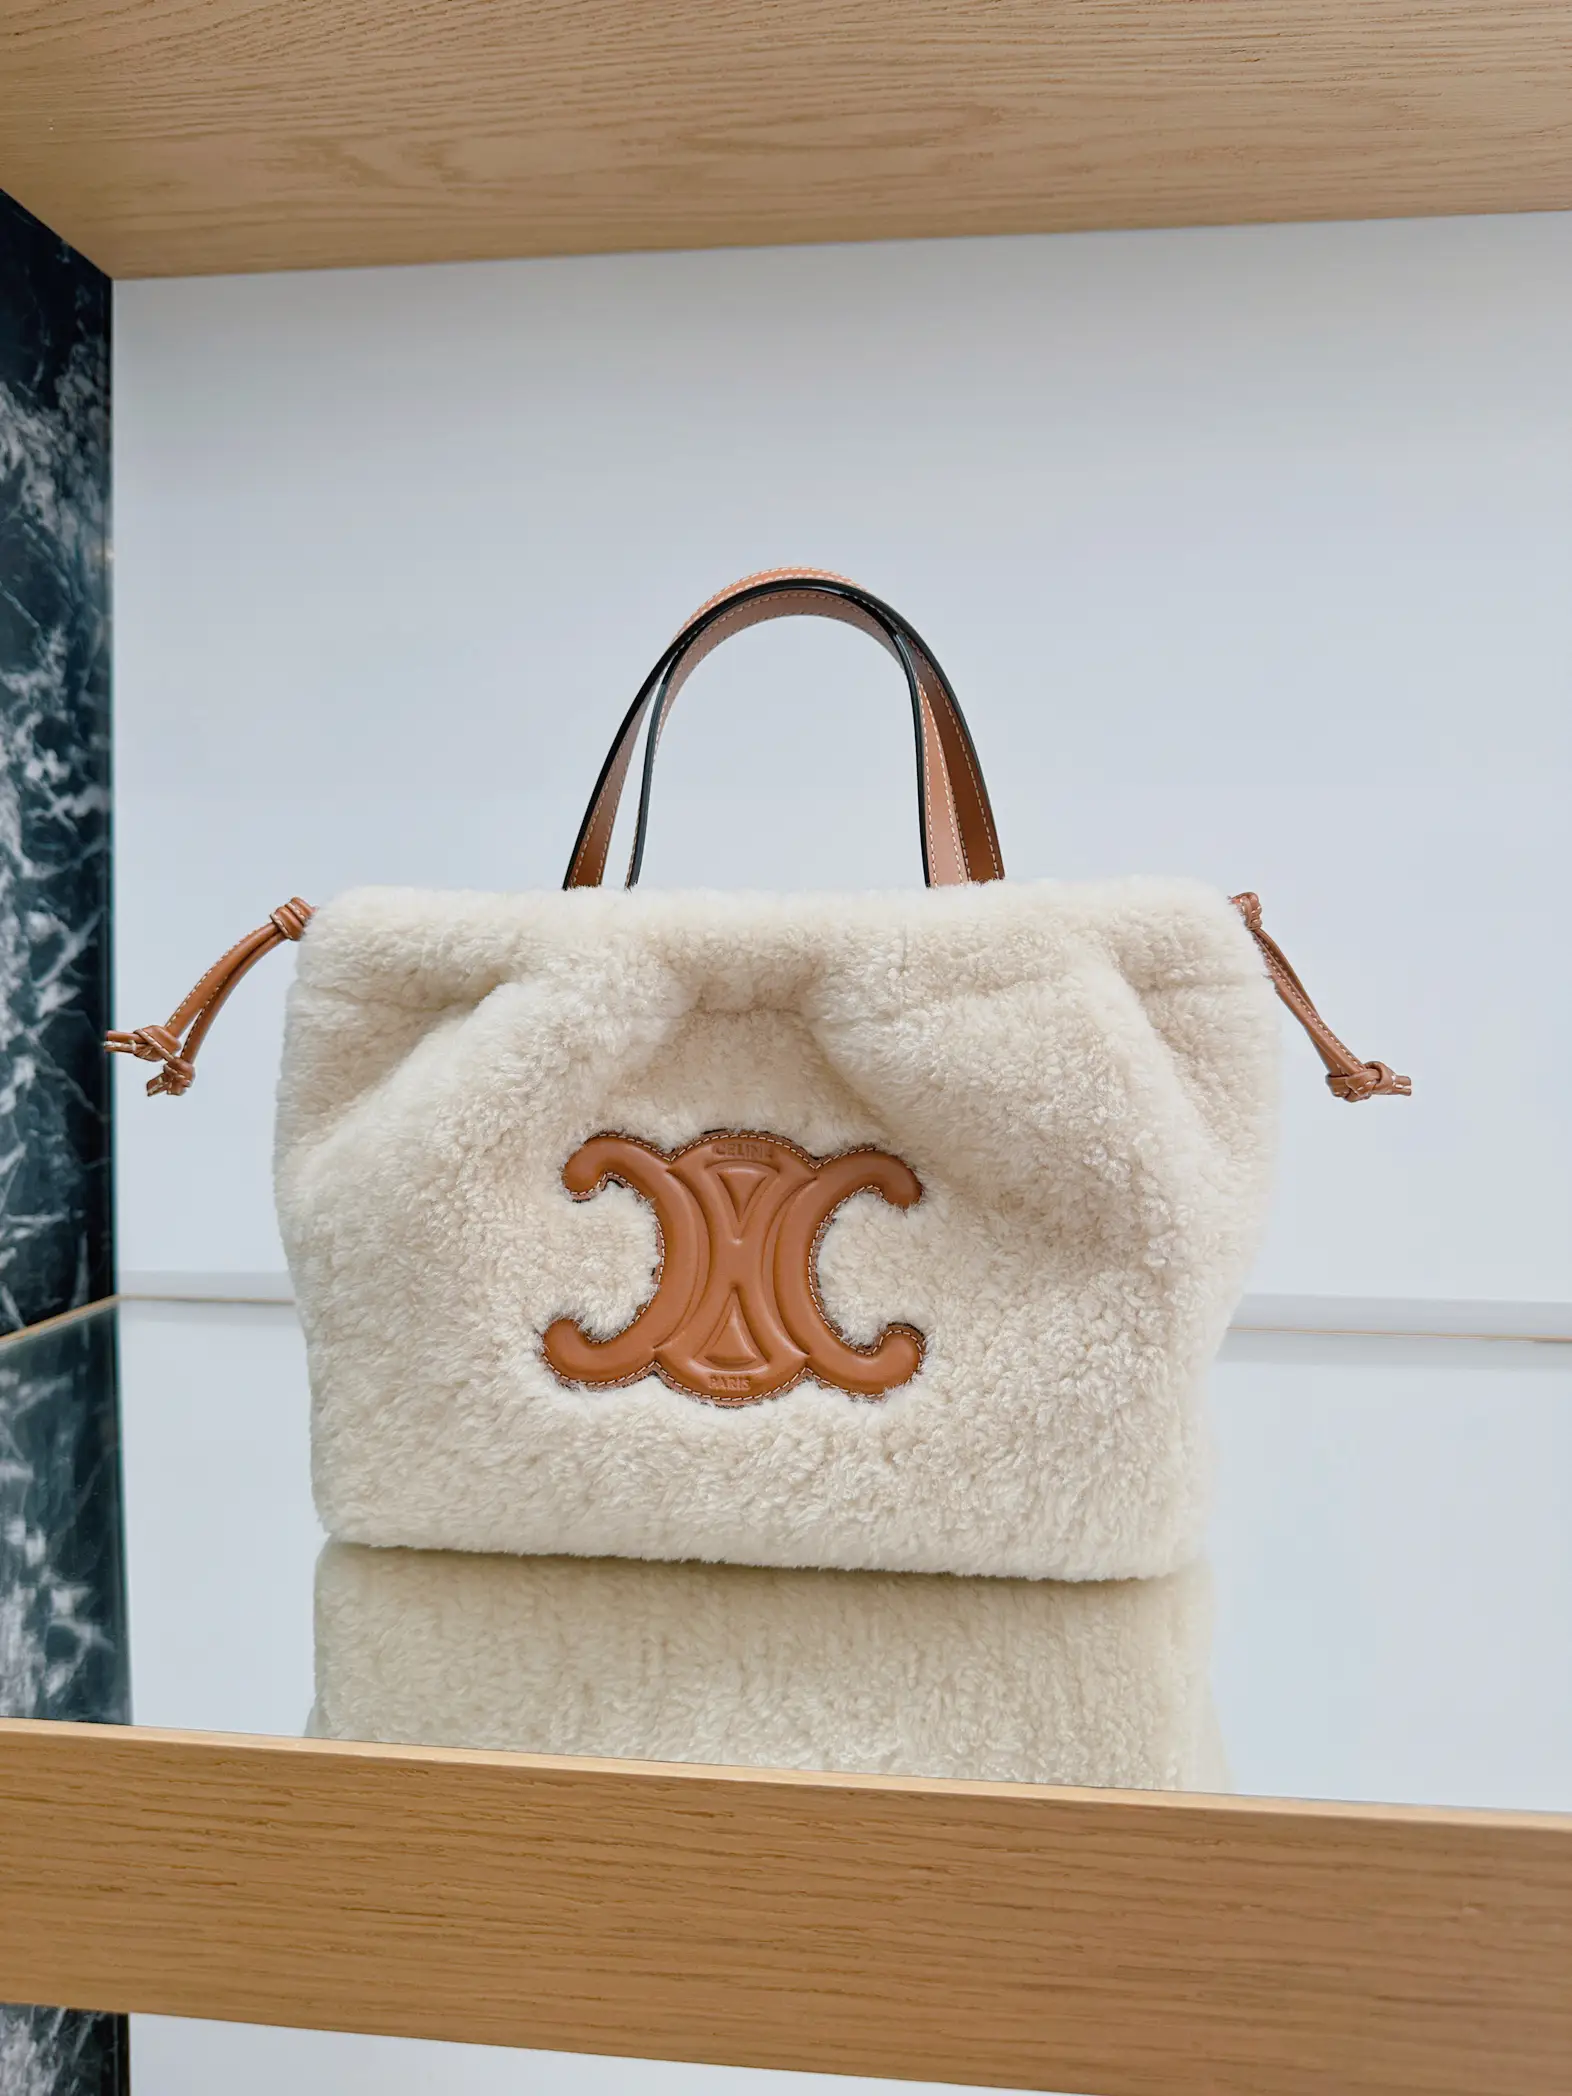 Trying on the Celine Small Boston Bag, Gallery posted by michelleorgeta